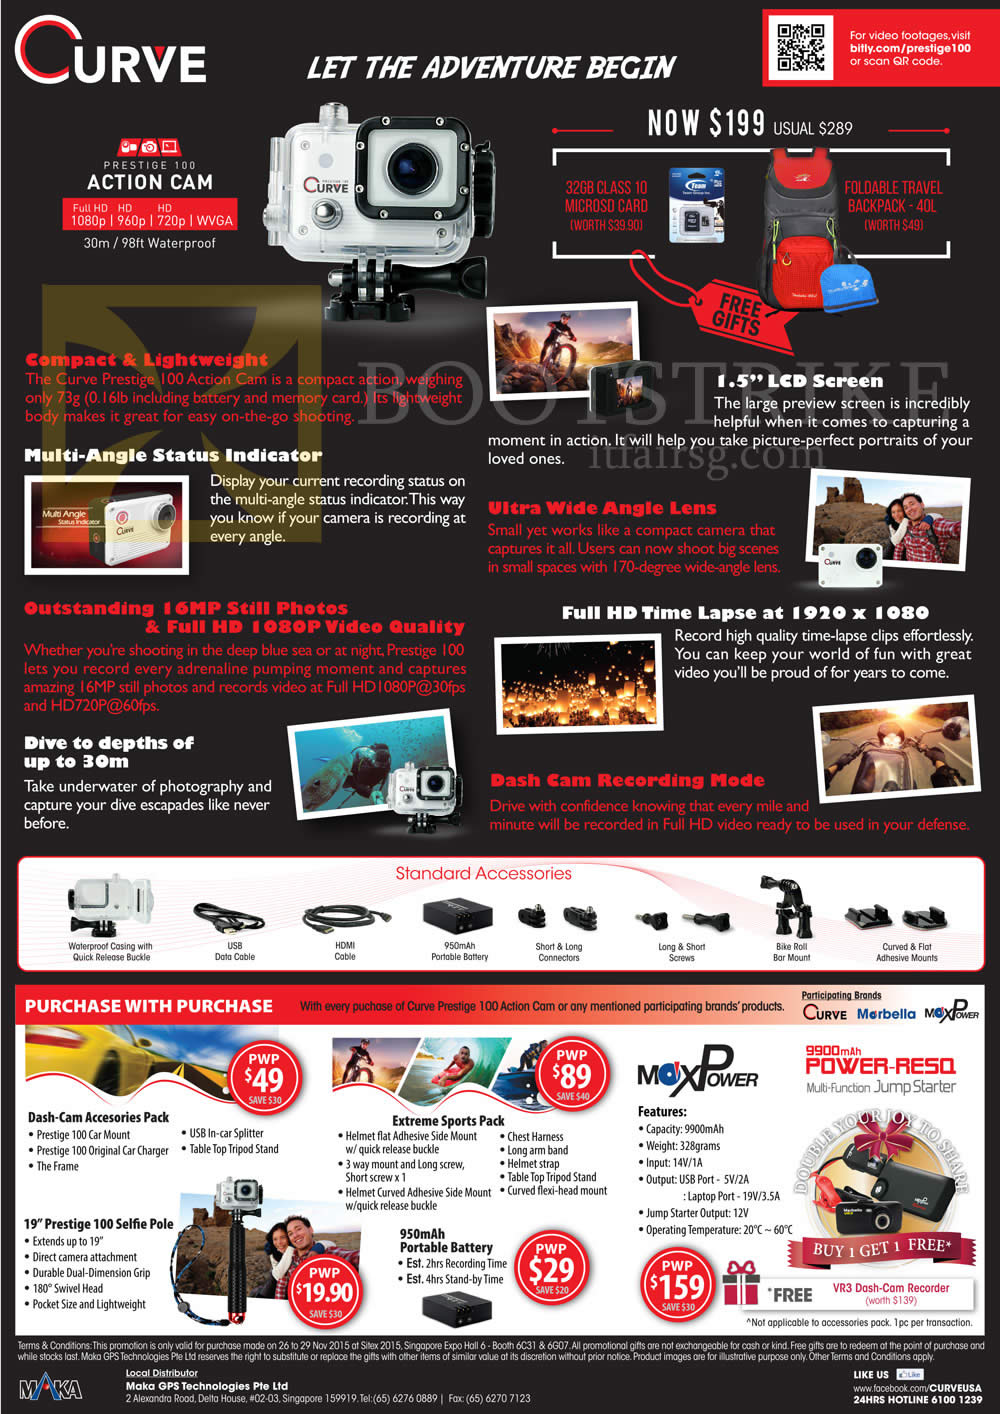 SITEX 2015 price list image brochure of Maka GPS Marbella Curve Prestige 100 Action Cam Features